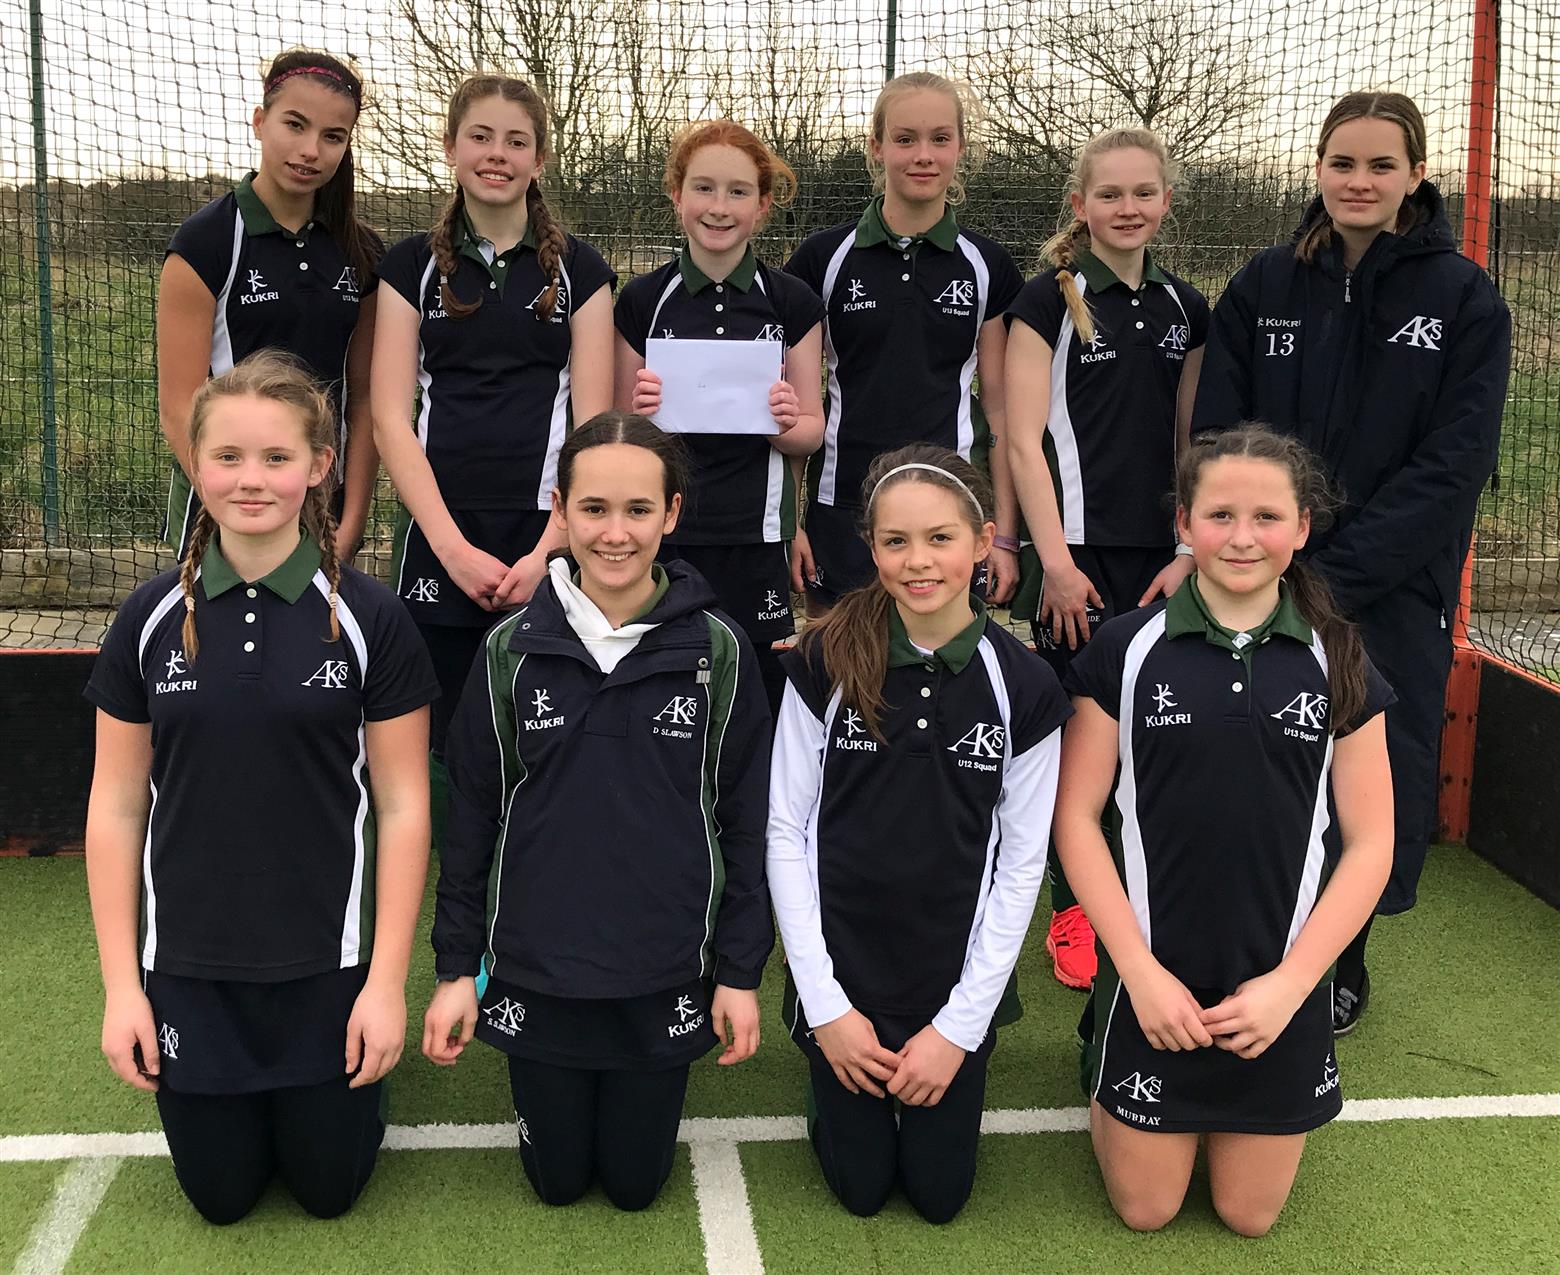 U13 Hockey team finish Runners-Up in North West Finals